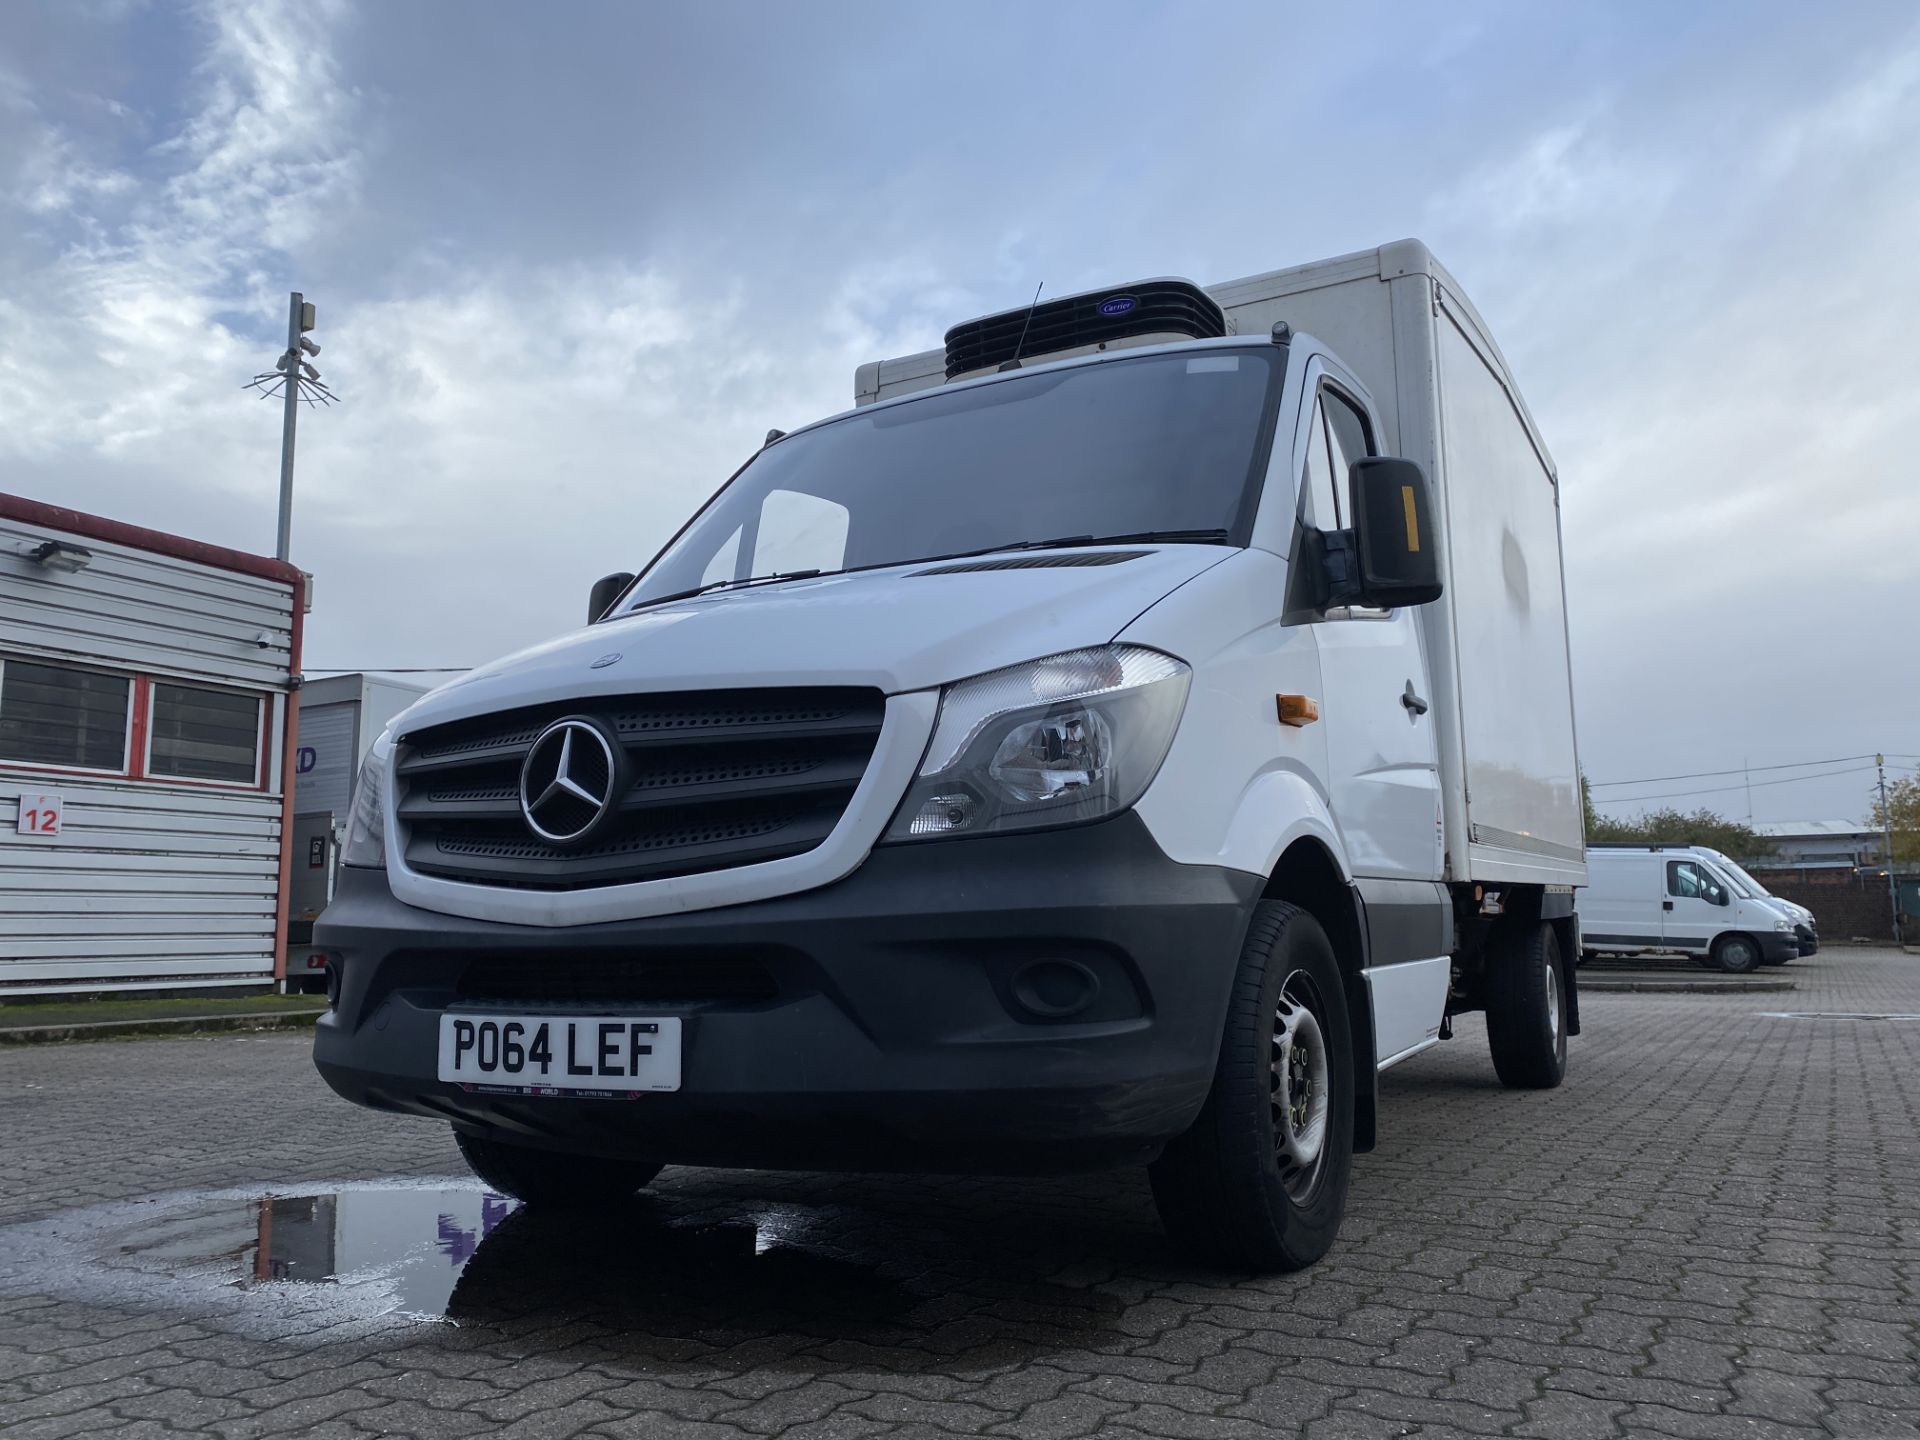 Mercedes Sprinter 313 CDI Insulated Refrigerated Box Van - Image 23 of 77